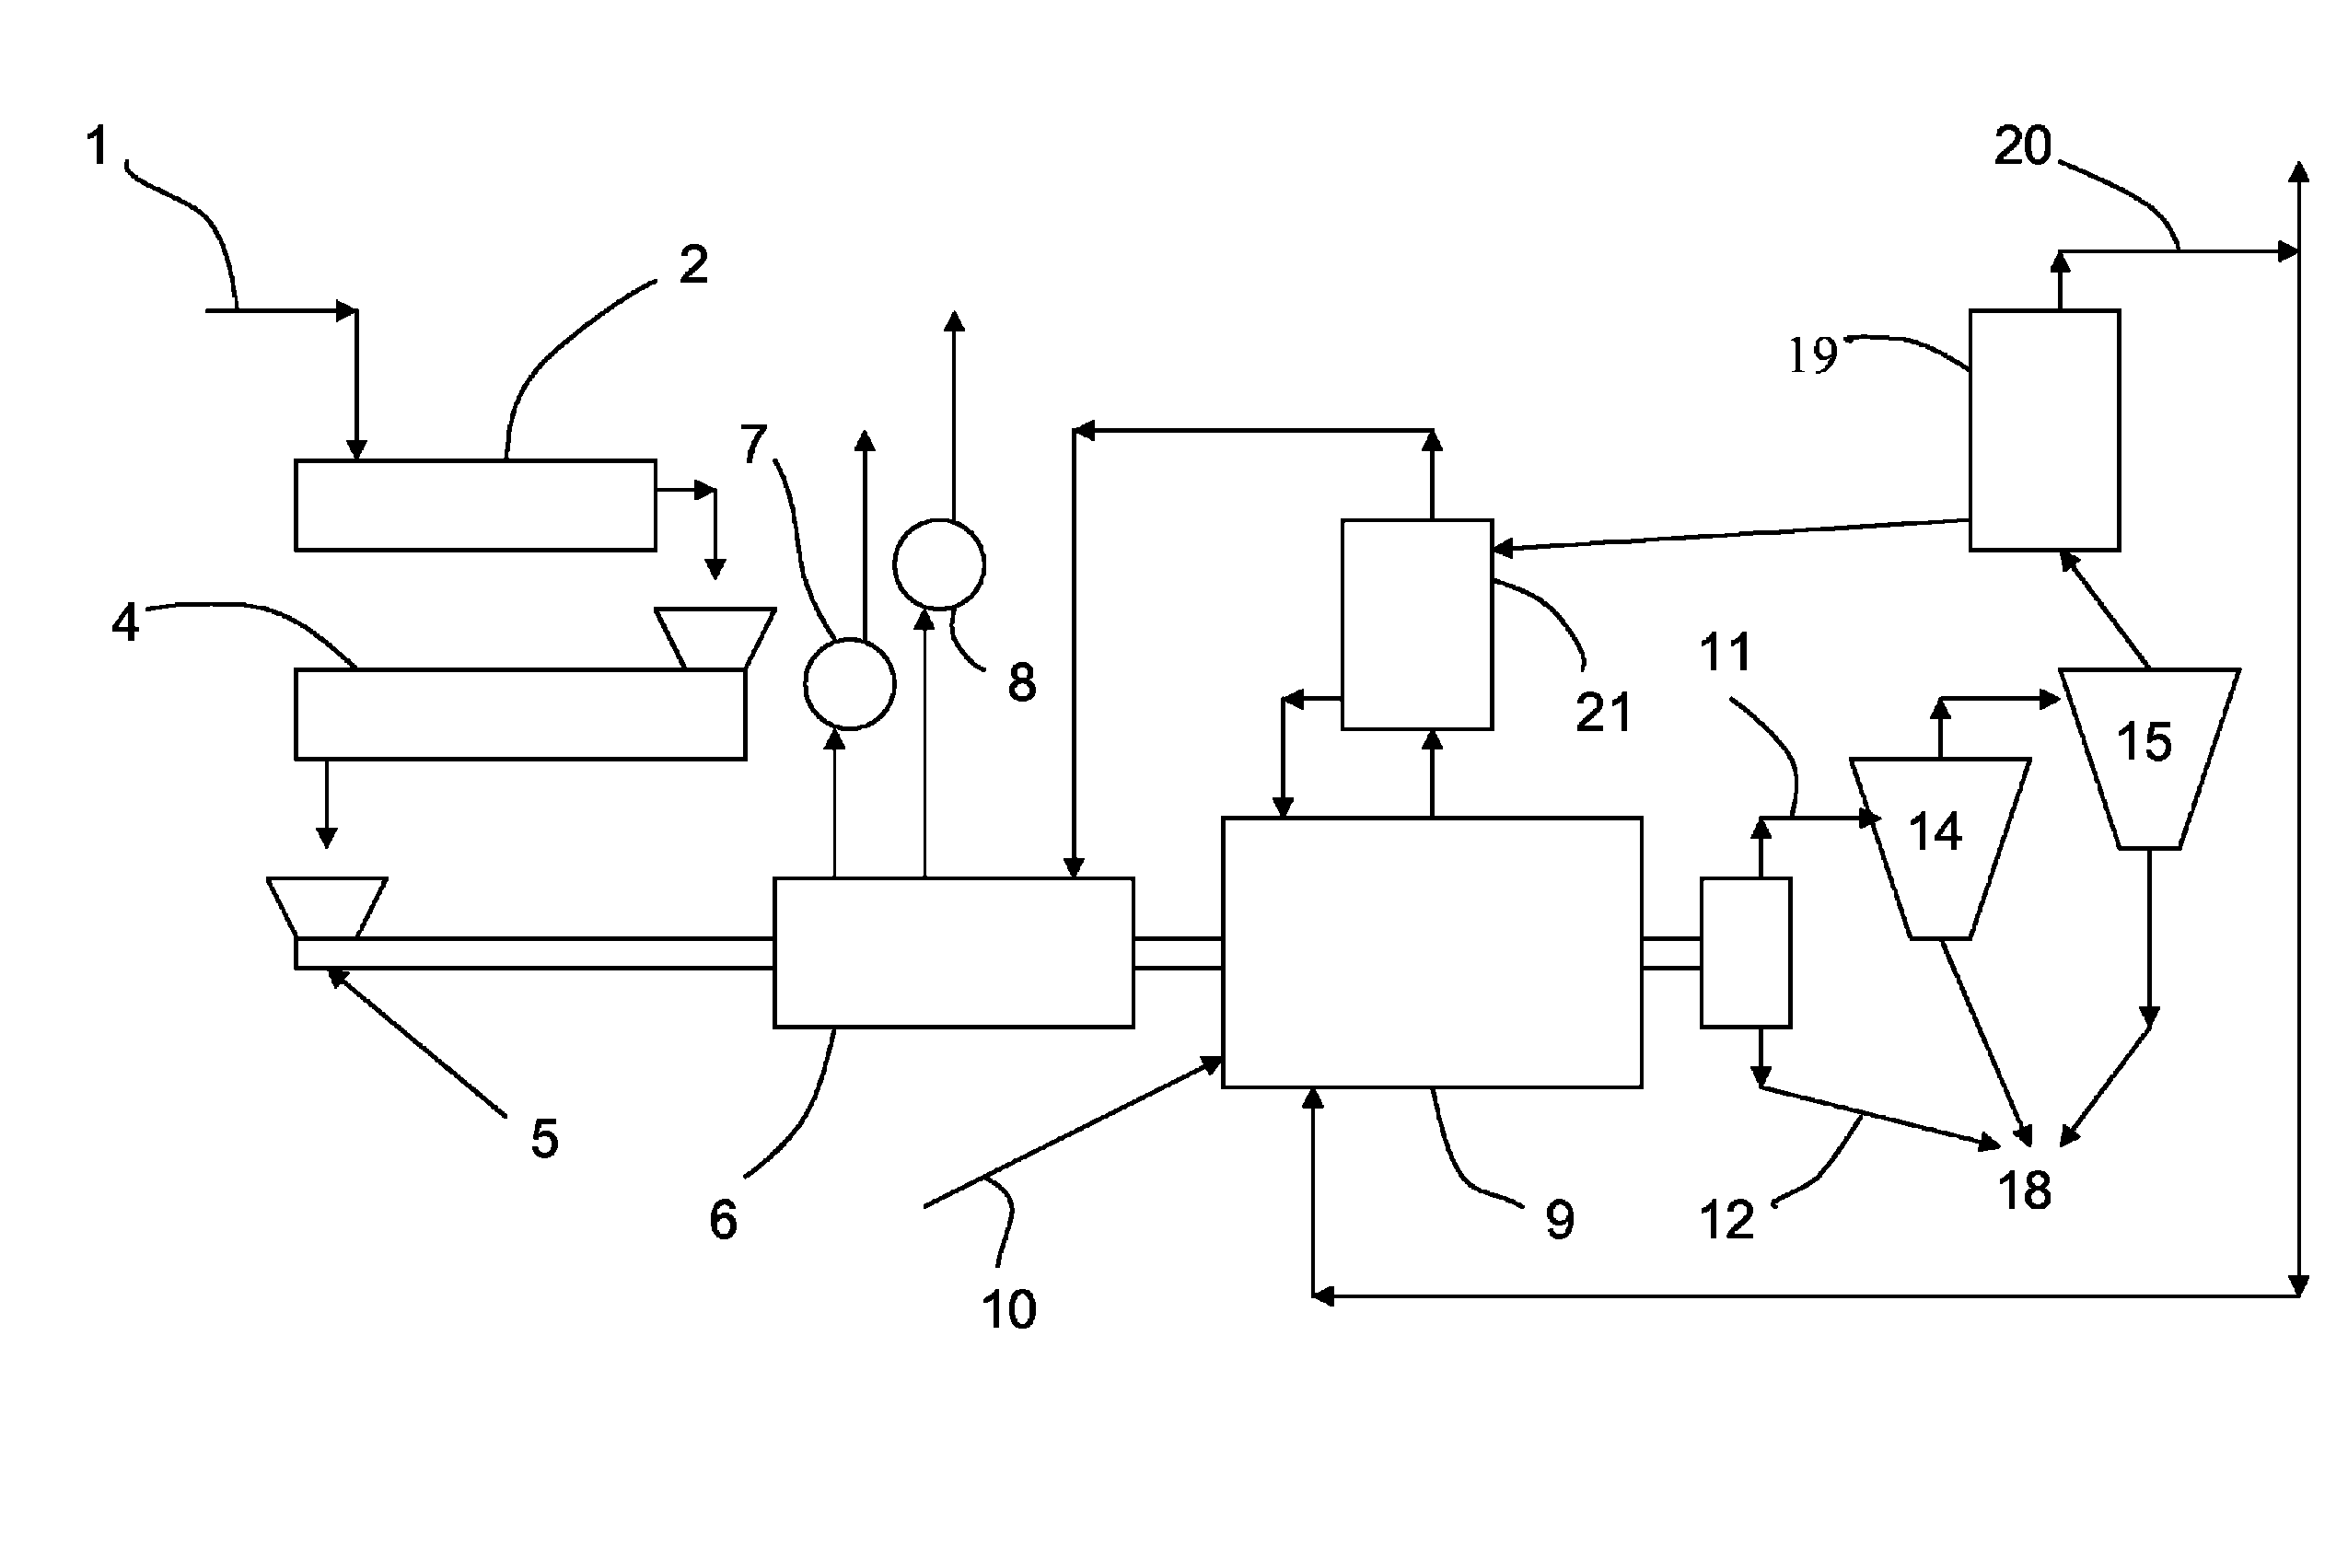 Method for steam reforming carbonaceous material